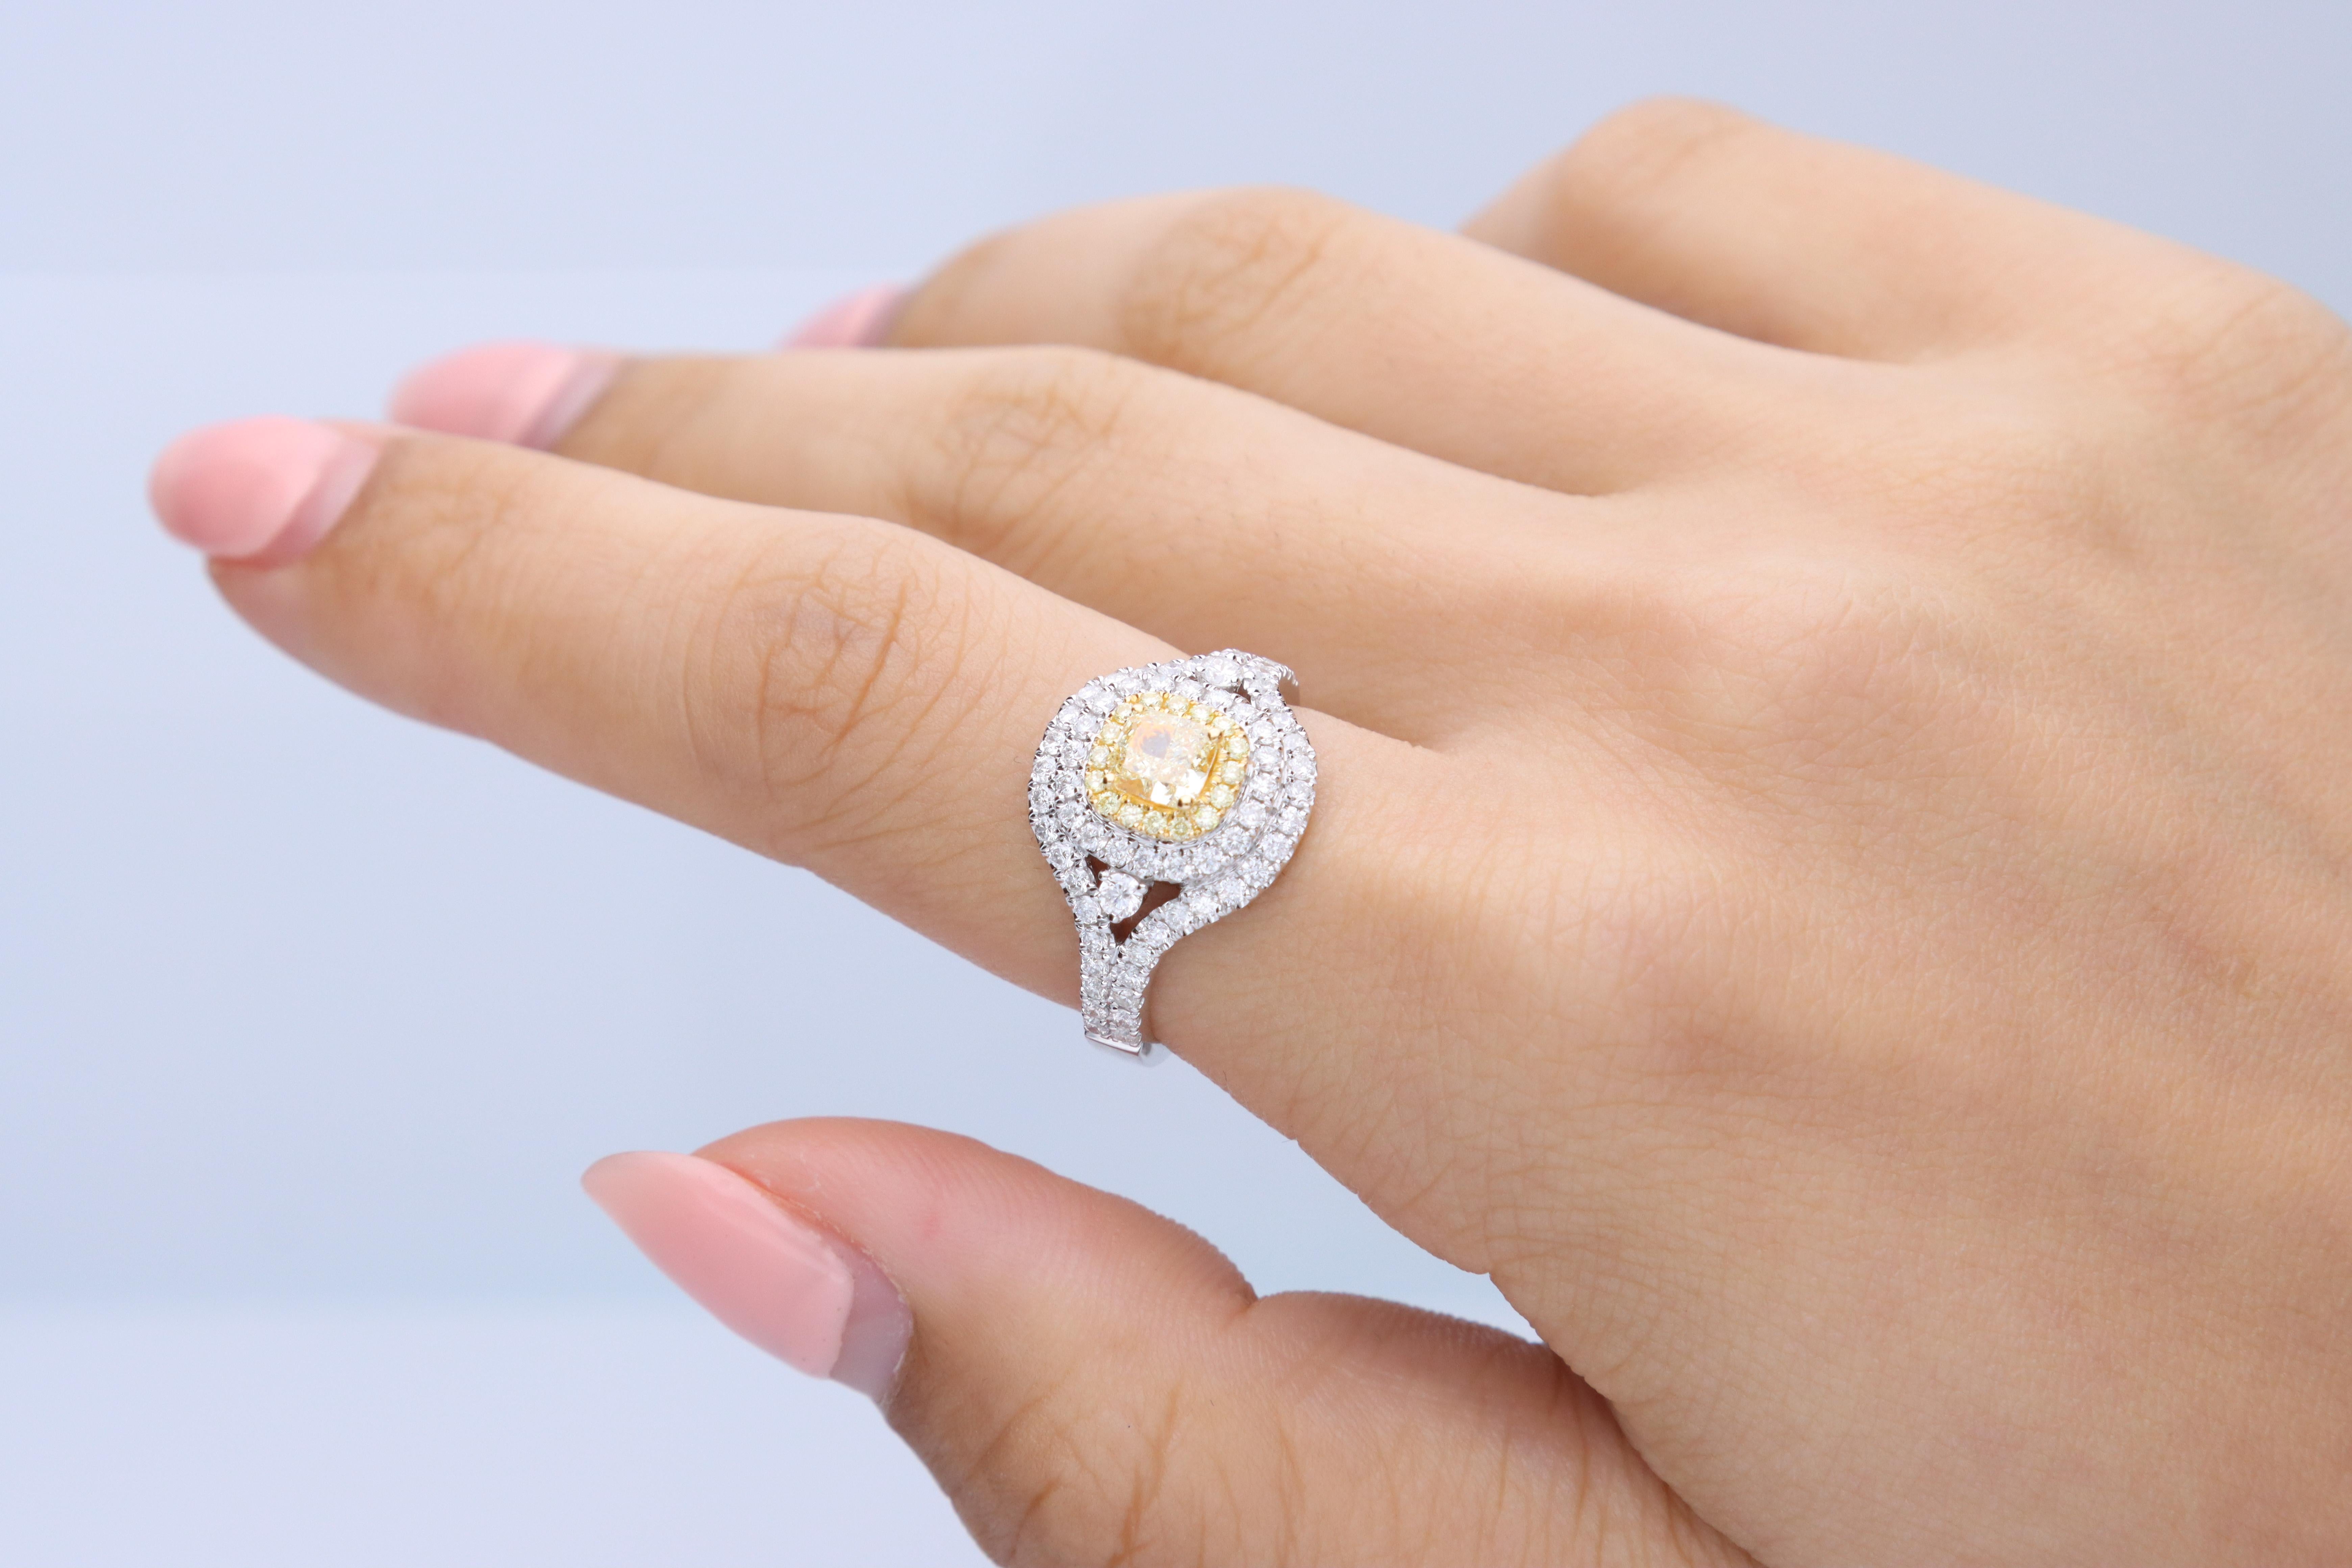 Stunning, timeless and classy eternity Unique Ring. Decorate yourself in luxury with this Gin & Grace Ring. The 18K Two Tone Gold jewelry boasts with Cushion-cut 1 pcs 0.63 carat, Round-cut 16 pcs 0.11 carat Yellow Diamond and Natural Round-cut